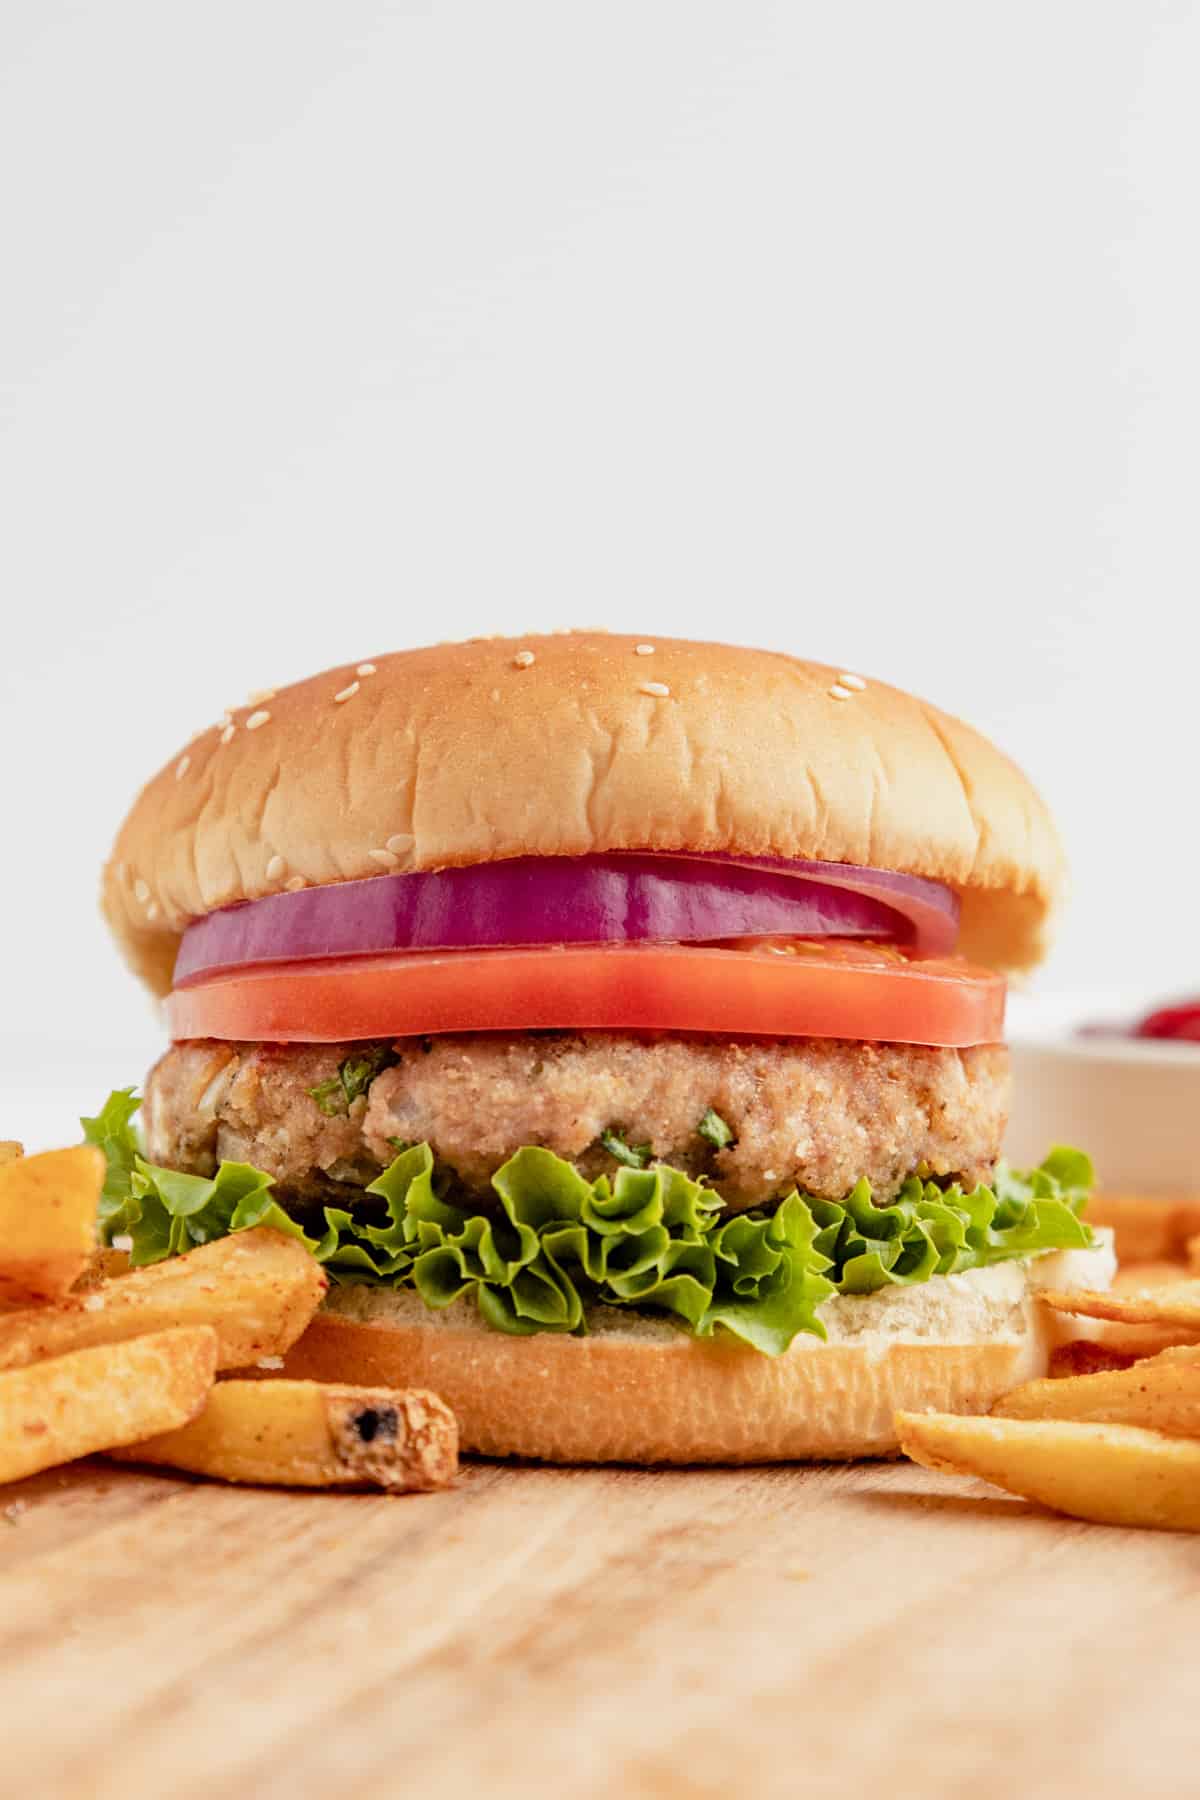 Gluten free turkey burger with lettuce, tomato, and onion served with fries.